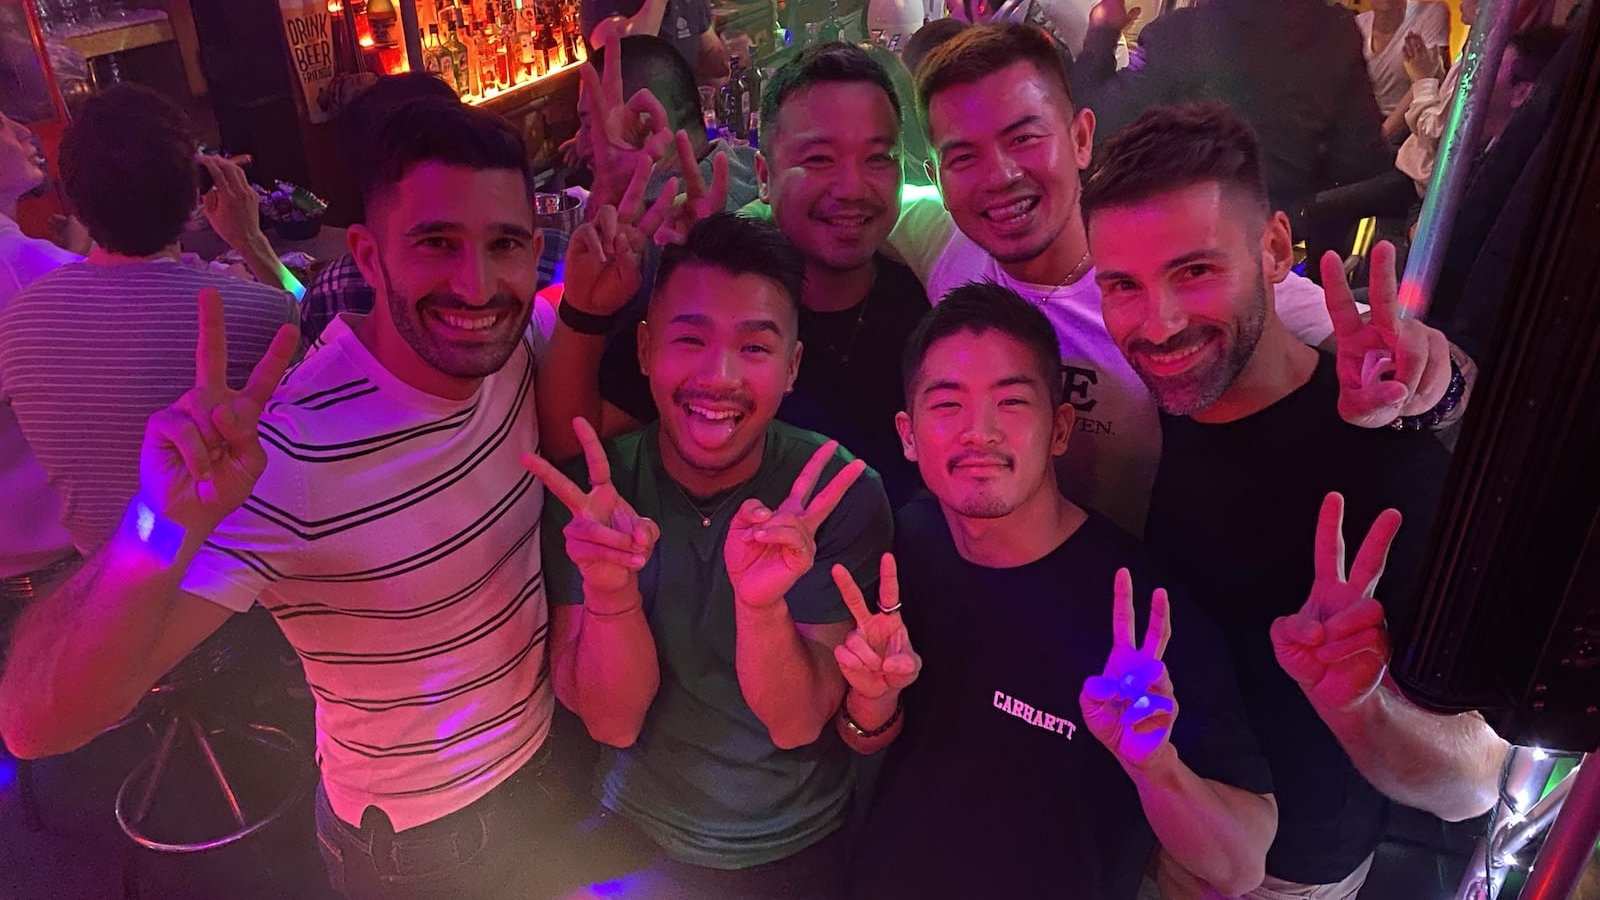 To experience Tokyo's gay nightlife, you can join a fun tour with a local guide to take you to the best bars and clubs